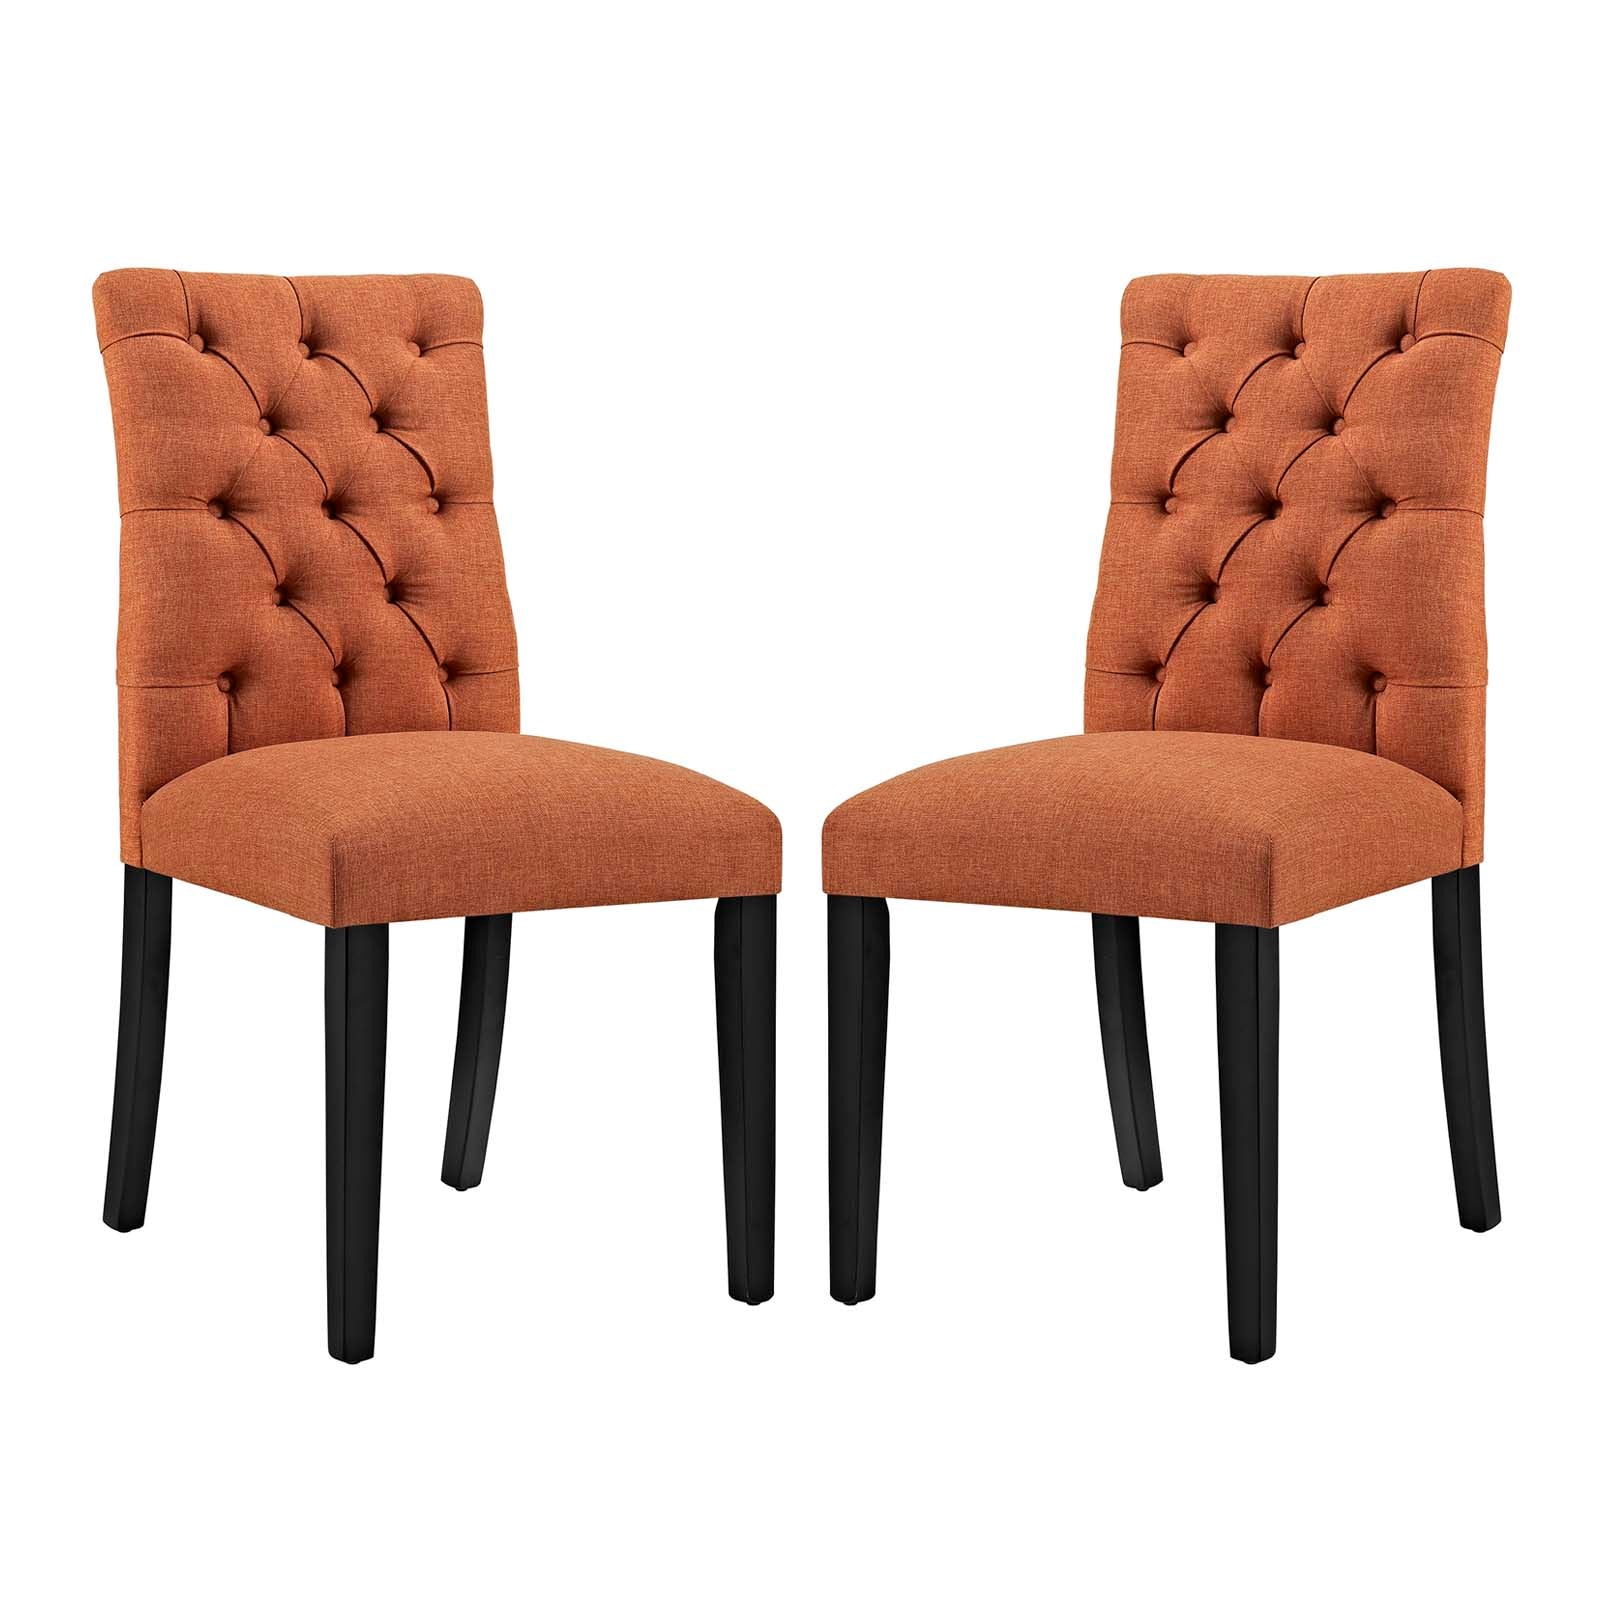 Modway Dining Chairs - Duchess Dining Chair Fabric ( Set of 2 ) Orange